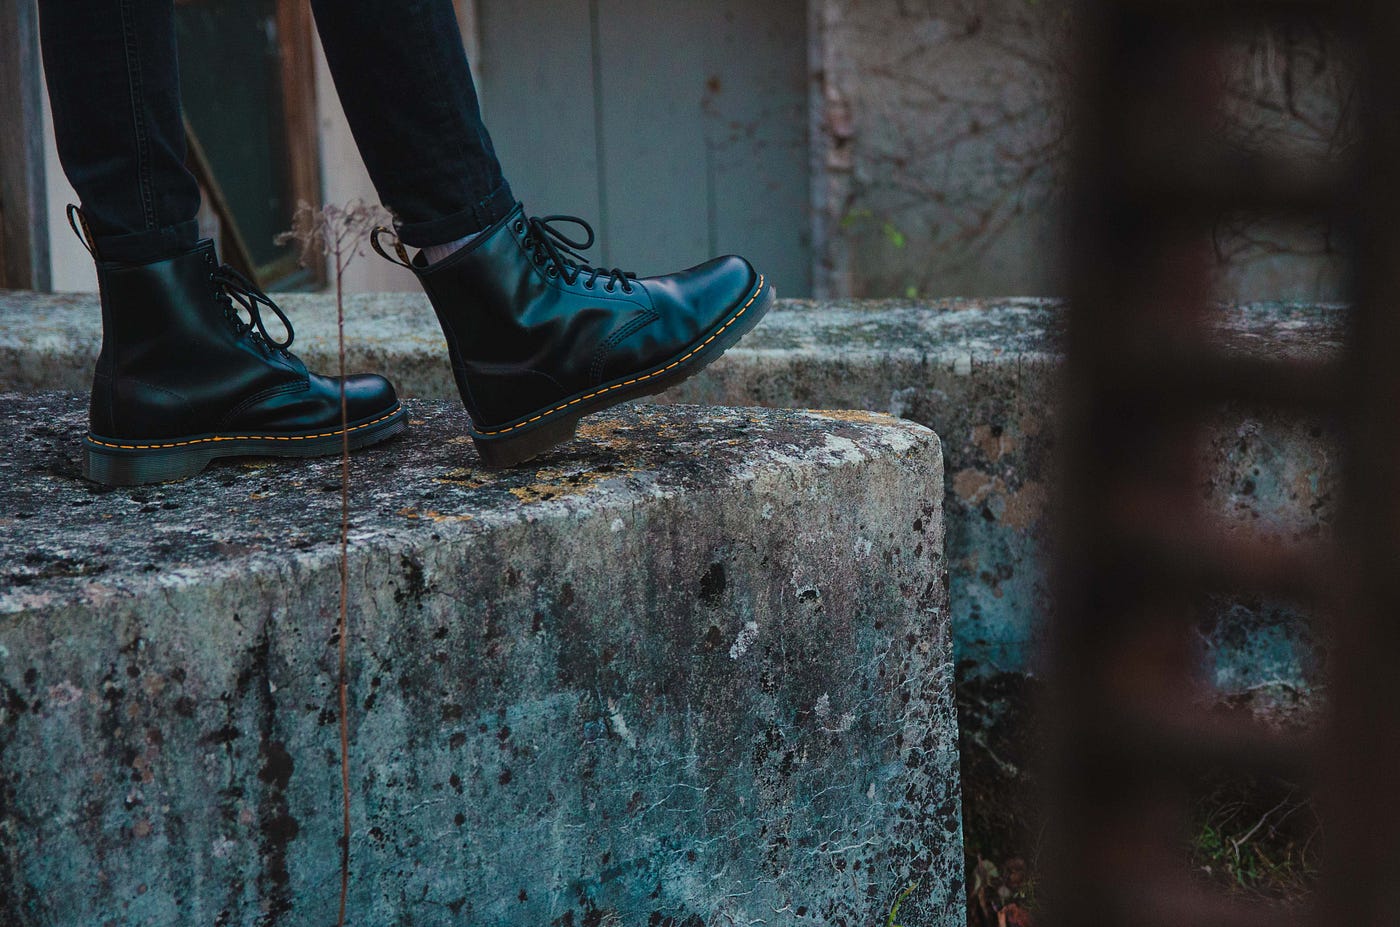 Stock Analysis - Long Thesis on Dr Martens (£DOCS.L) | Investor's Handbook